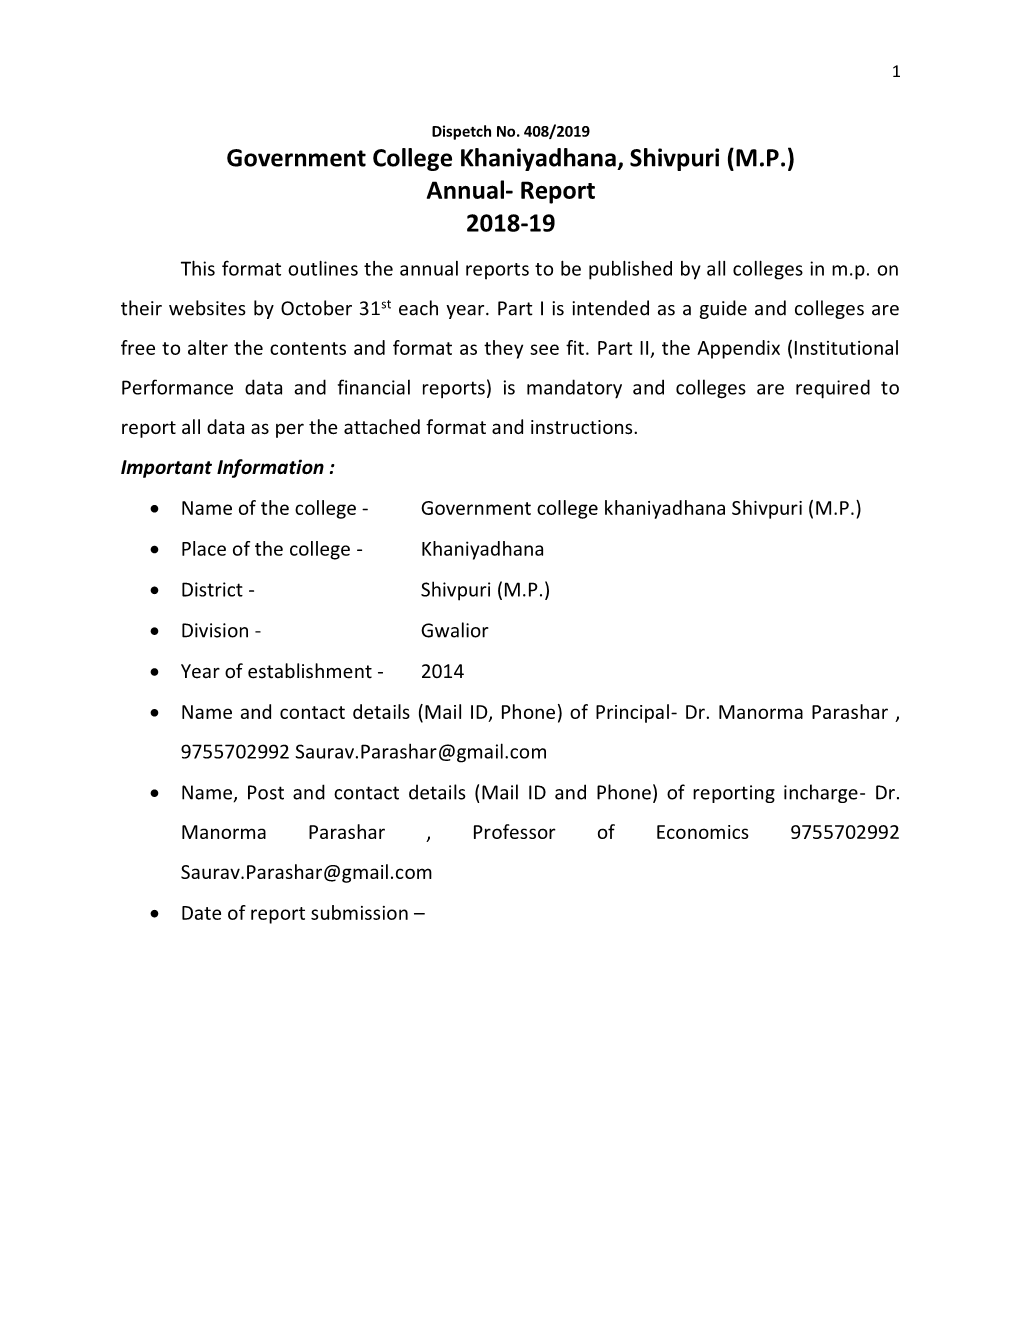 Government College Khaniyadhana, Shivpuri (M.P.) Annual- Report 2018-19 This Format Outlines the Annual Reports to Be Published by All Colleges in M.P